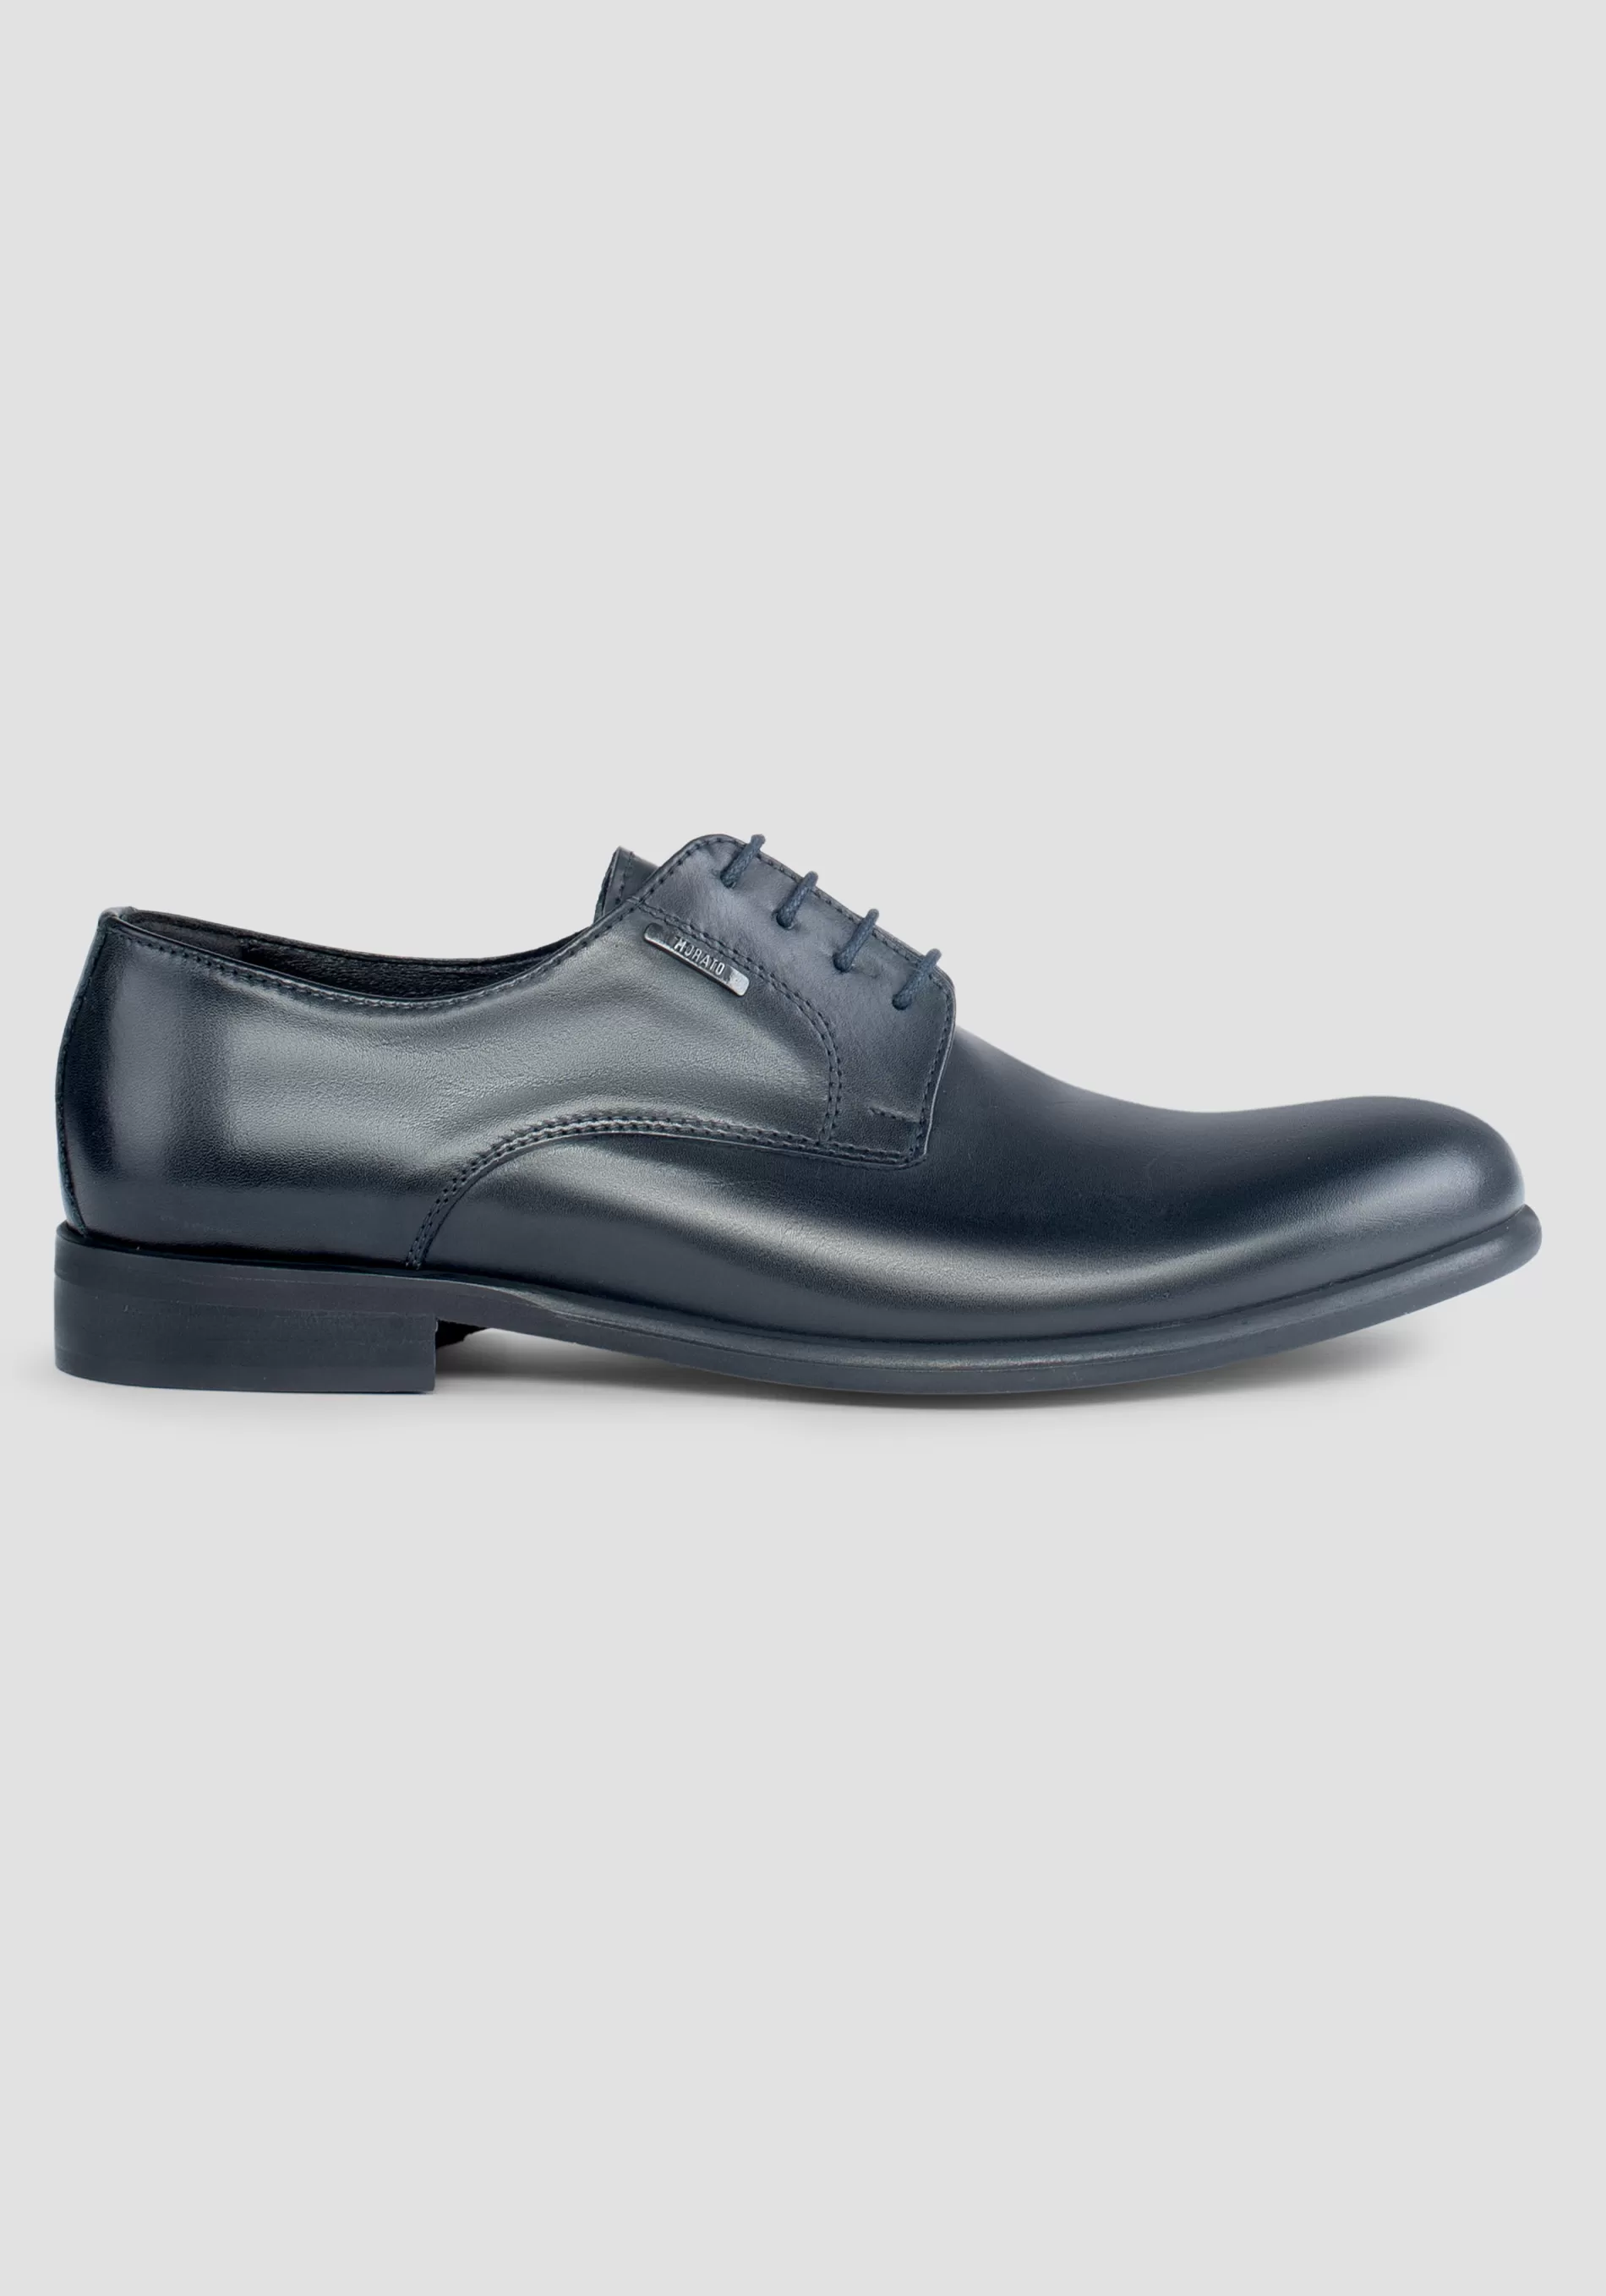 Outlet "HURT" LEATHER DERBY Formal shoes